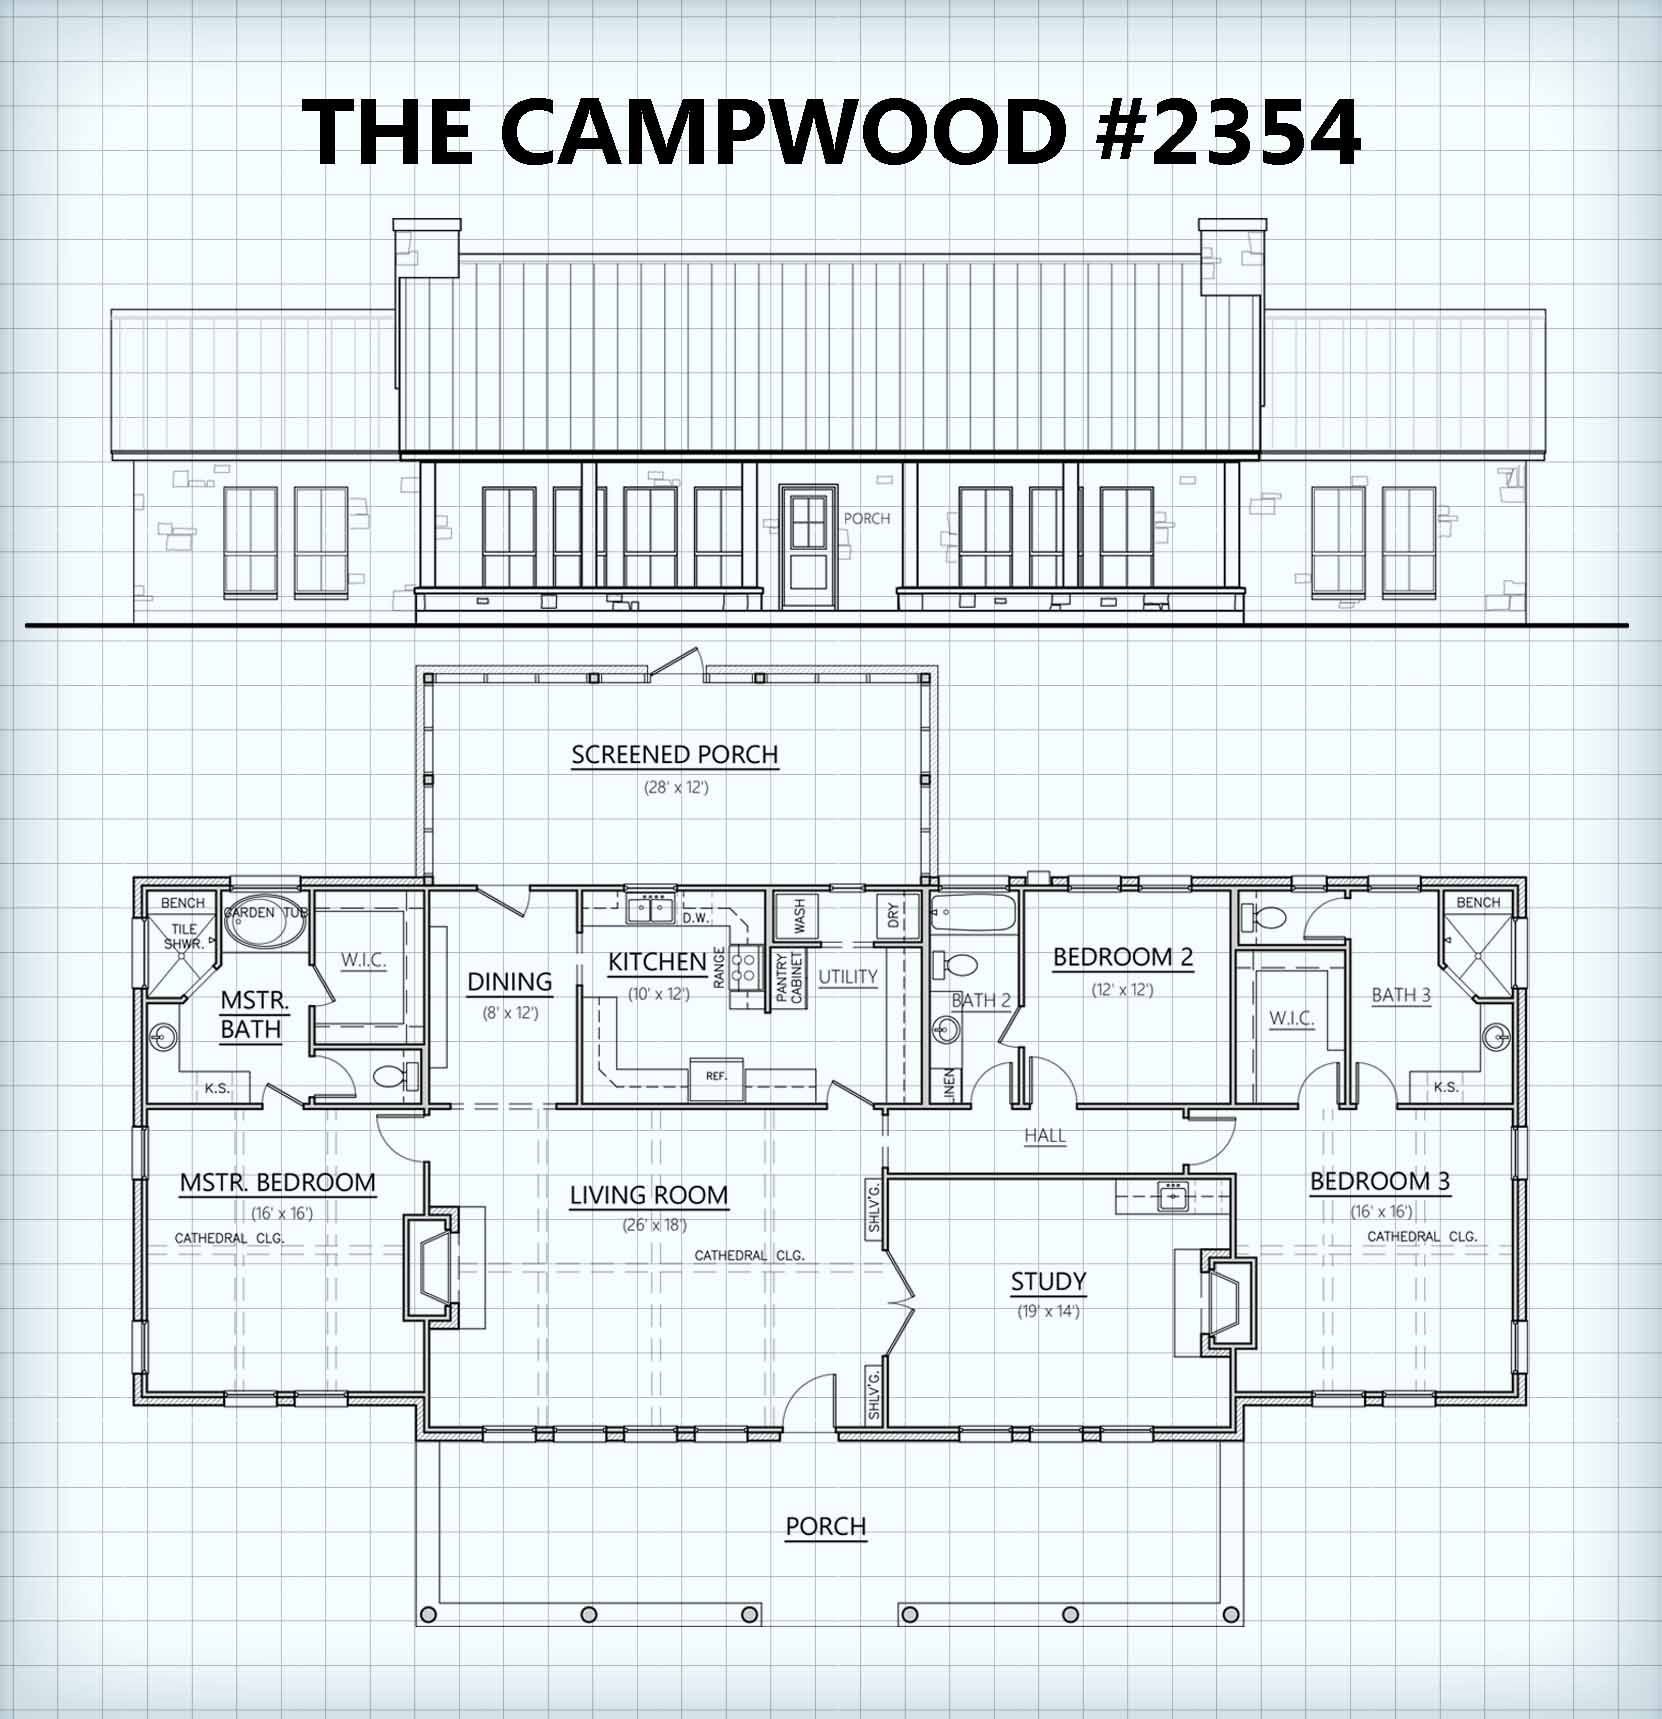 The Campwood #2354